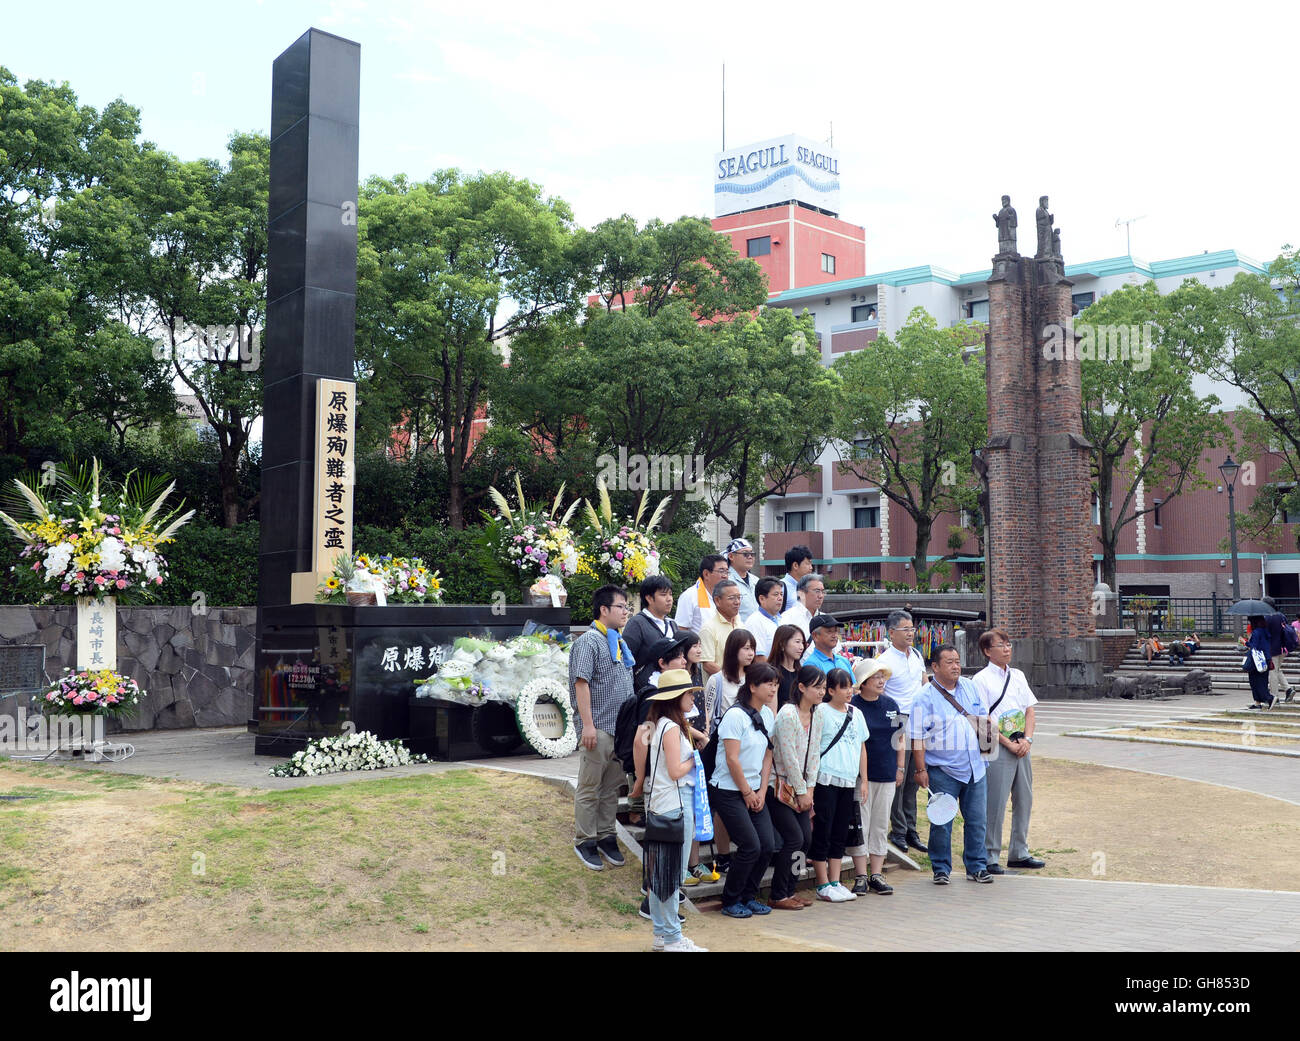 Nagasaki, Peace Park in Nagasaki. 9th Aug, 2016. People pose for photos in front of the monument at the atomic bomb hypocenter to commemorate the 71st anniversary of U.S. atomic bombing, at the Peace Park in Nagasaki, on Aug. 9, 2016. To accelerate Japan's surrender in the World War II, the U.S. forces dropped two atomic bombs on Hiroshima and Nagasaki respectively on Aug. 6 and 9, 1945. Credit:  Ma Ping/Xinhua/Alamy Live News Stock Photo